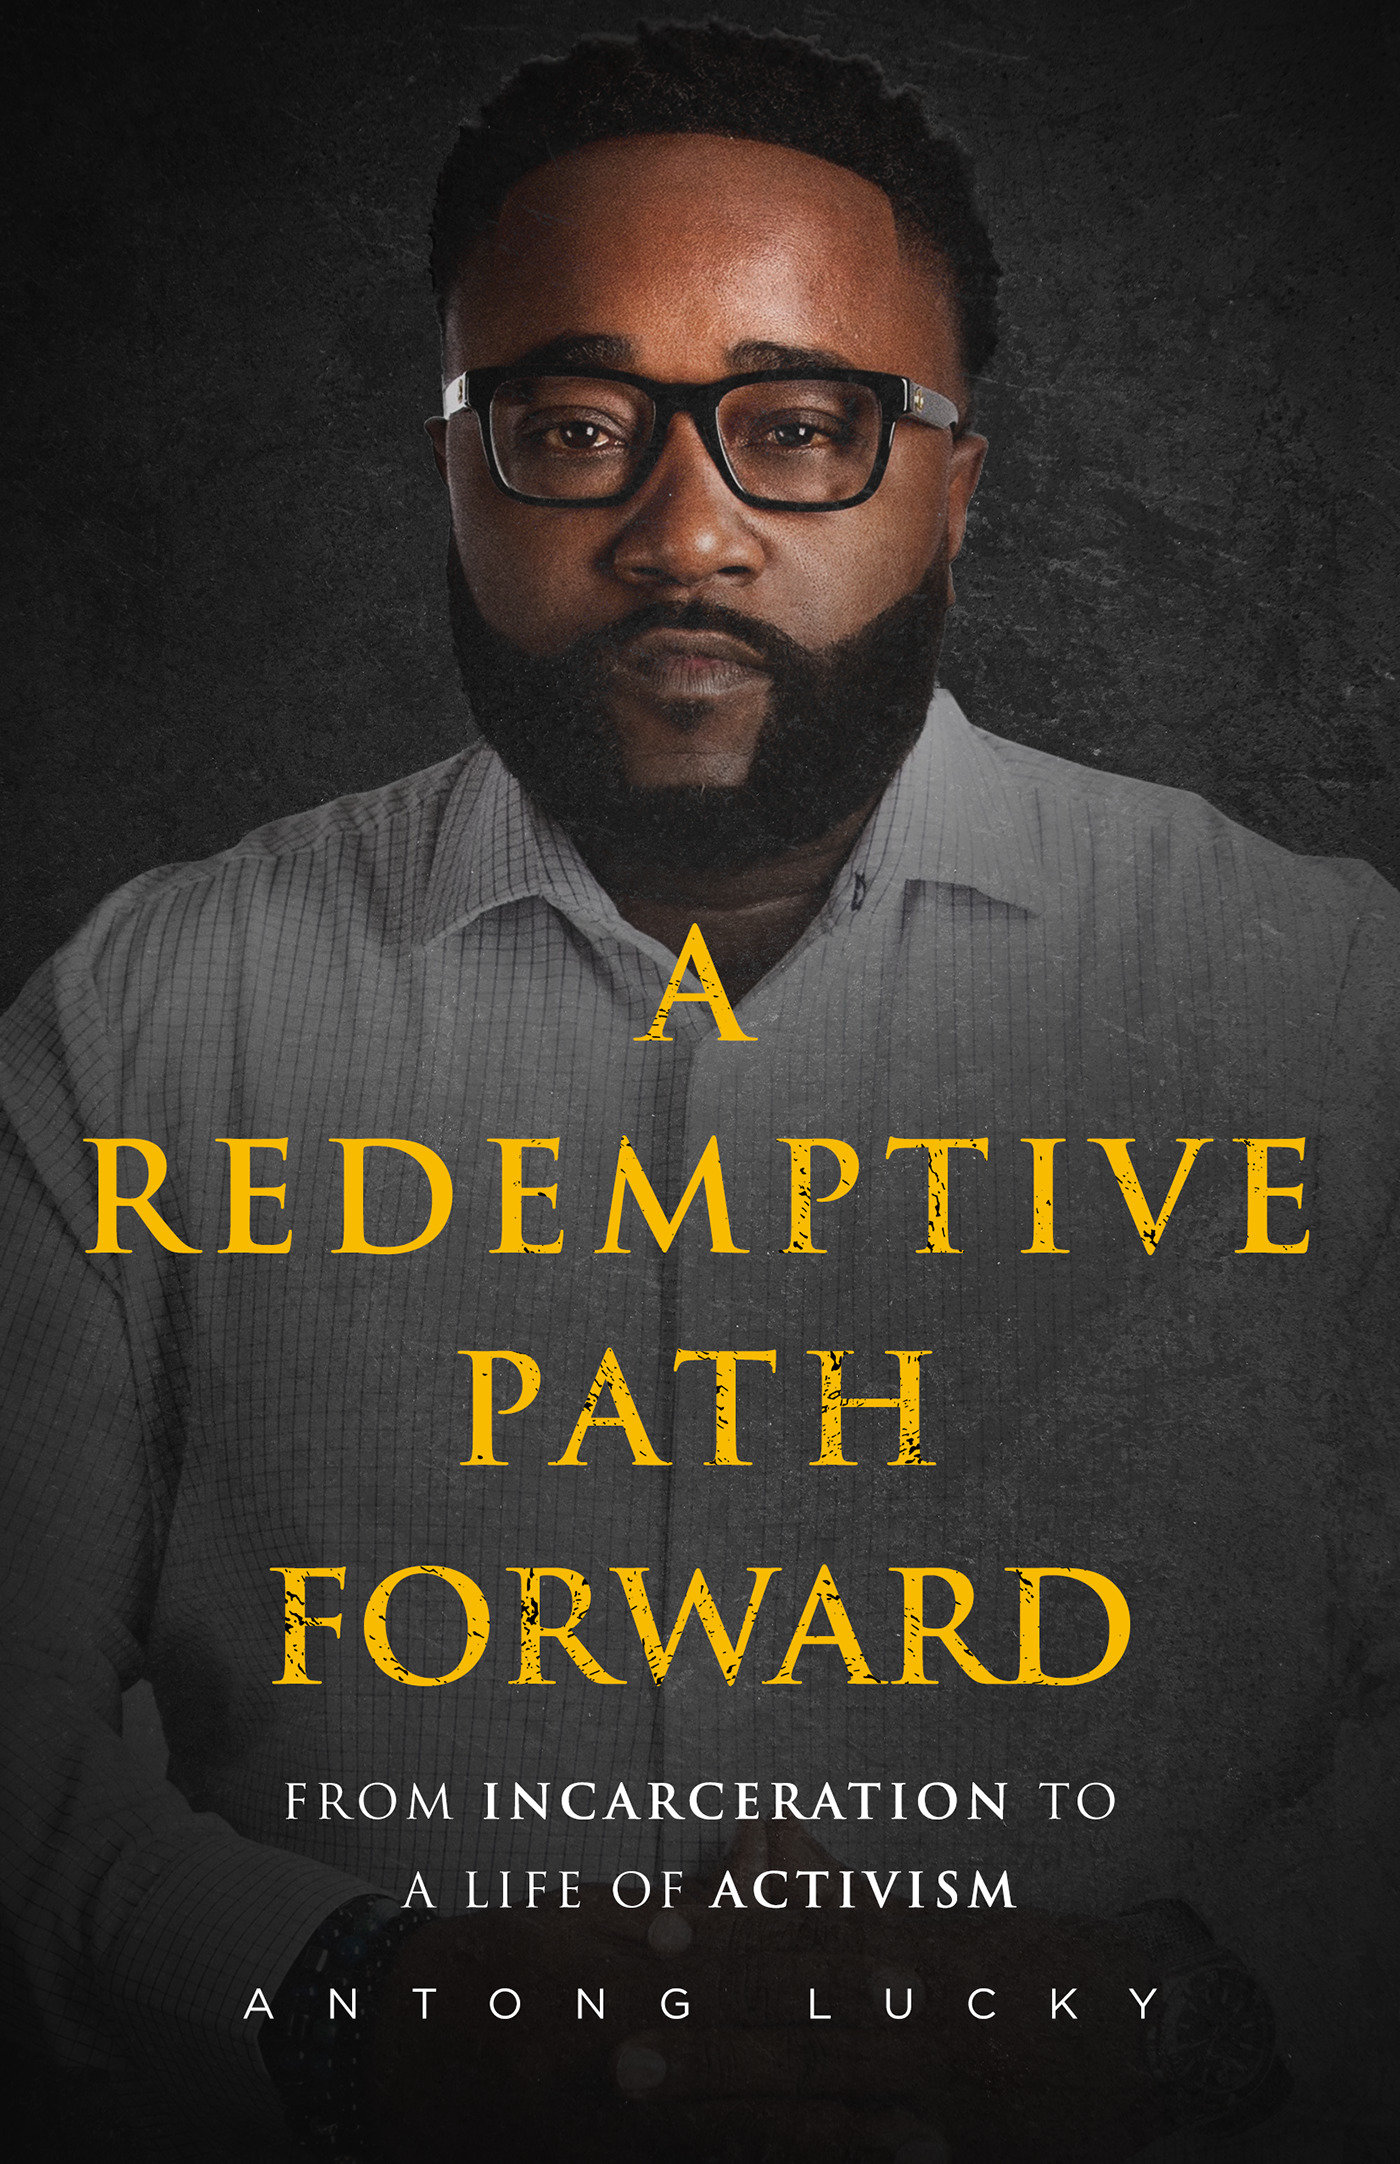 A Redemptive Path Forward (Hardcover Book)